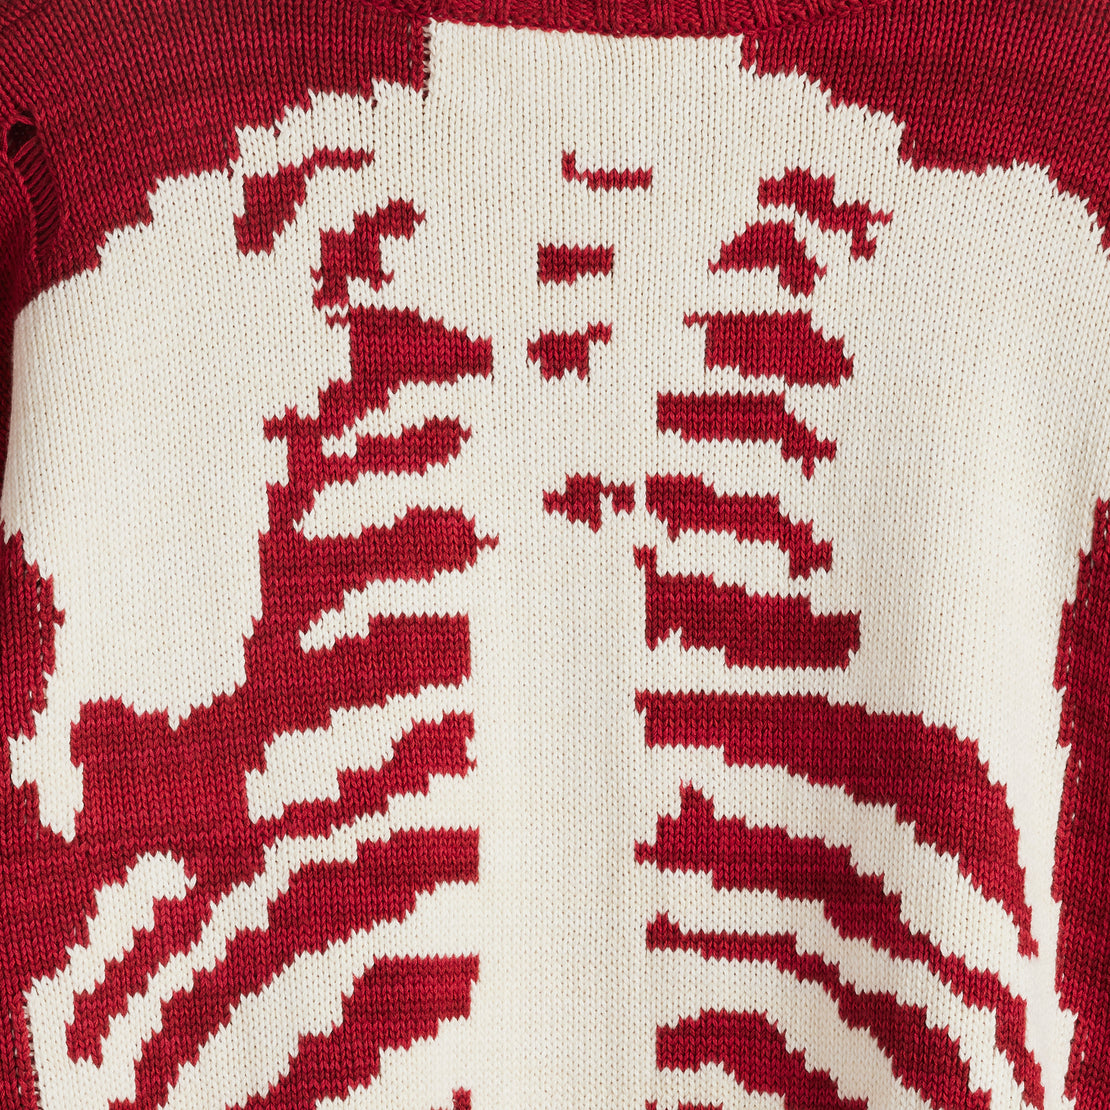 Kountry Cotton Knit Bone Crew Sweater - Red - Kapital - STAG Provisions - W - Tops - Sweater